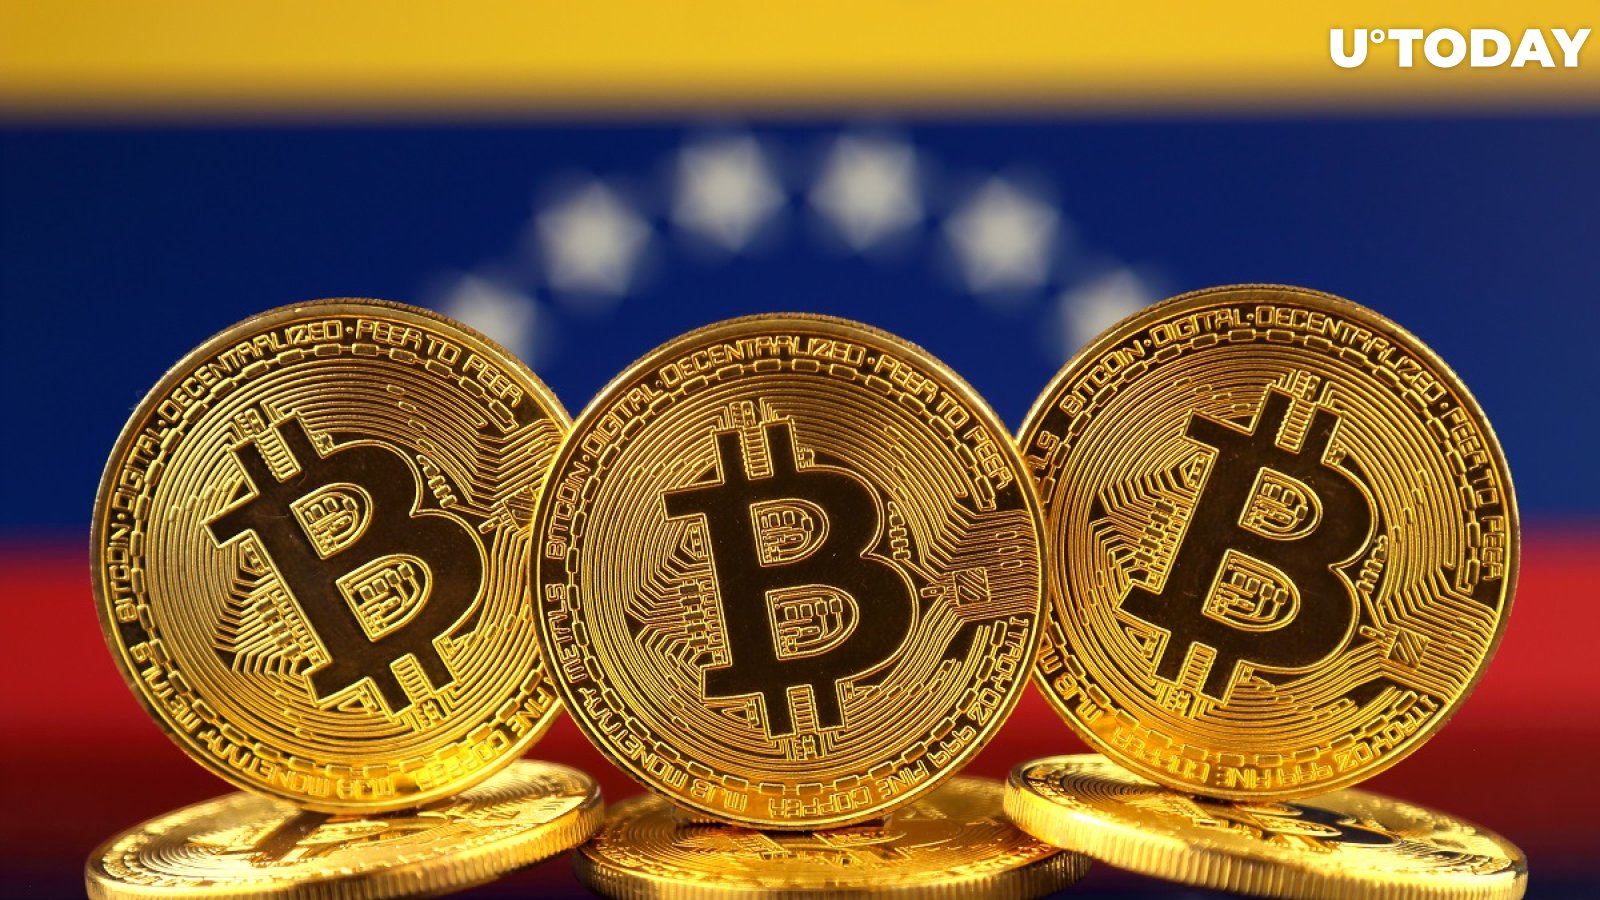 Tyler Winklevoss Expects Governments to Abandon Gold in Favor of Bitcoin as Bank of England Refuses to Release Venezuela's Riches